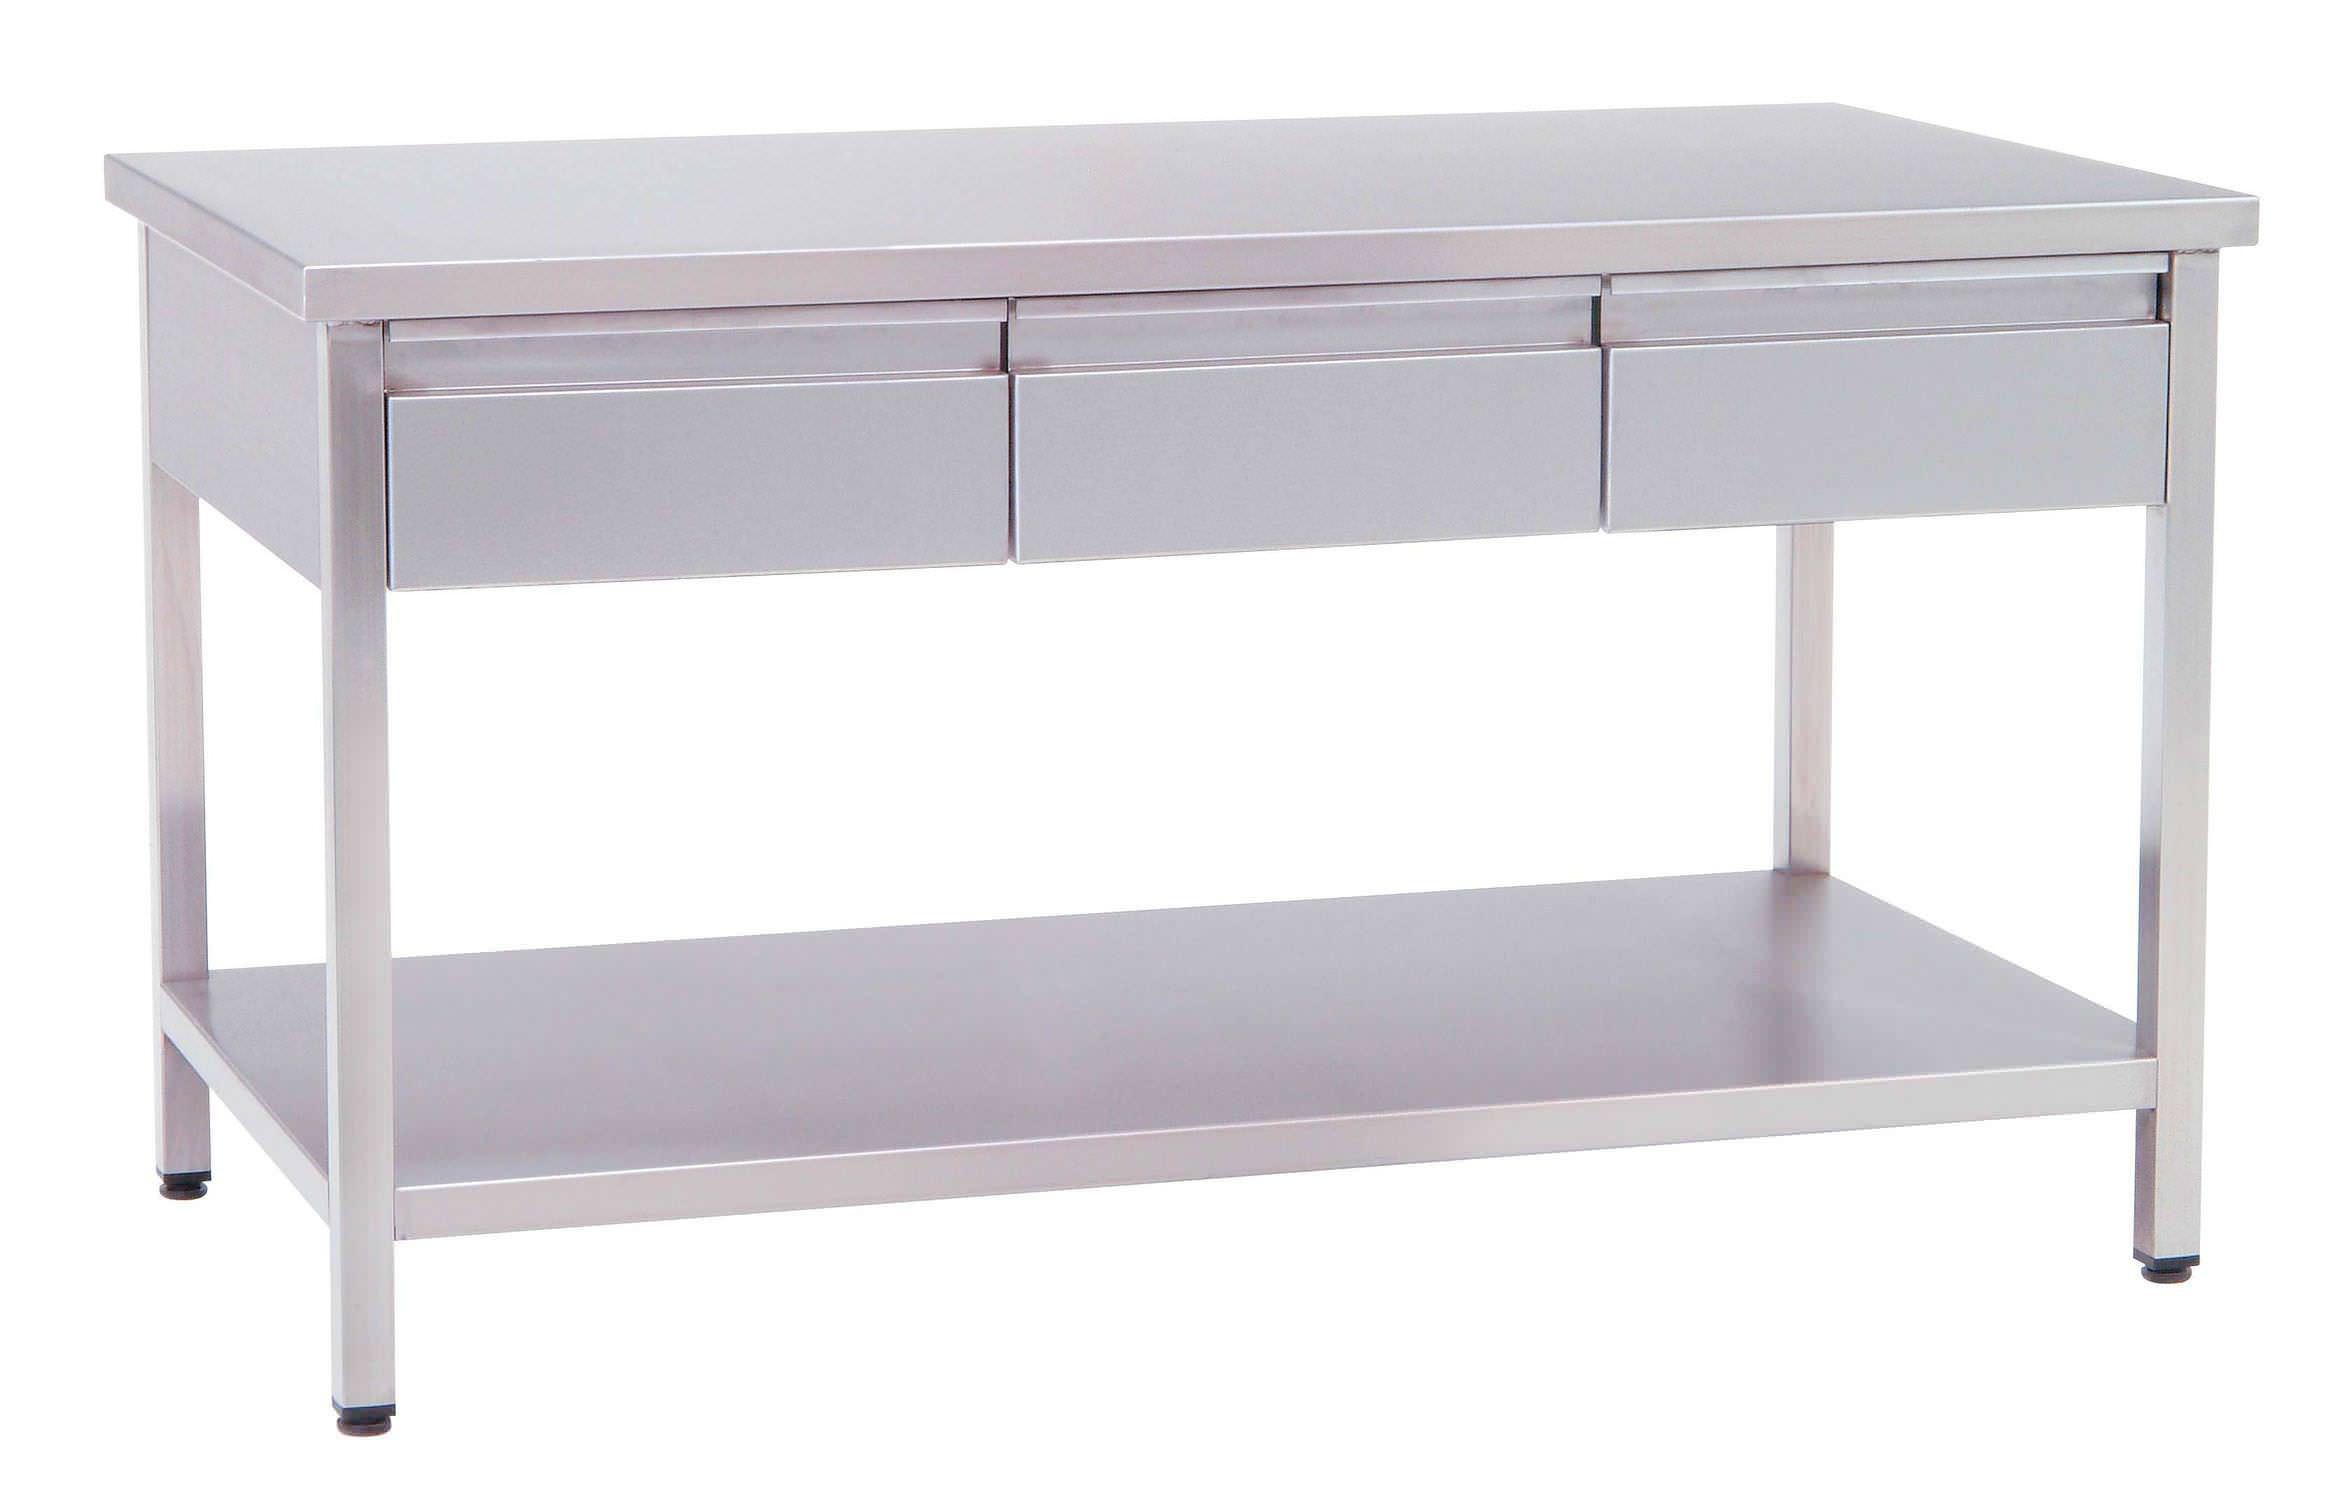 Image of: Stainless Steel Prep Tables